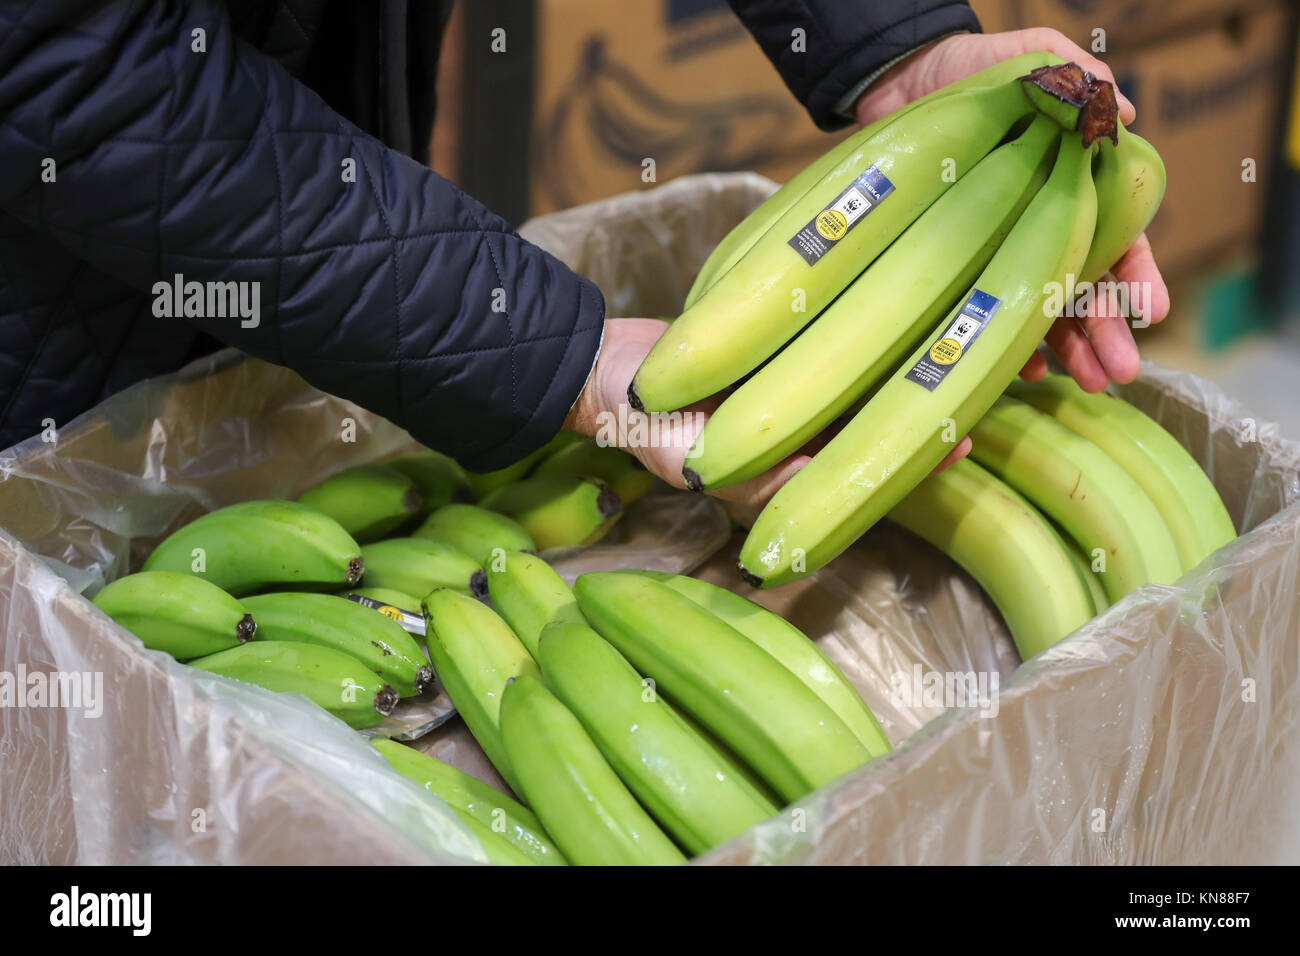 Stefan Worm, leader of Edeka Fruchtkontor Nord, presents ripened bananas in a ripening chamber from the new banana ripening store of the provision merchant in Borna, Germany, 15 November 2017. The green fruit ripens here under supervision for several days before they hit the shelves. The banana is a decisive economic factor: about 10 percent of Edeka's sales revenues is generated through bananas and pineapples. The banana is Germany's second favourite fruit after apples. The average German household buys an average of 16.64 kilograms of bananas according to the consumer research organization. Stock Photo